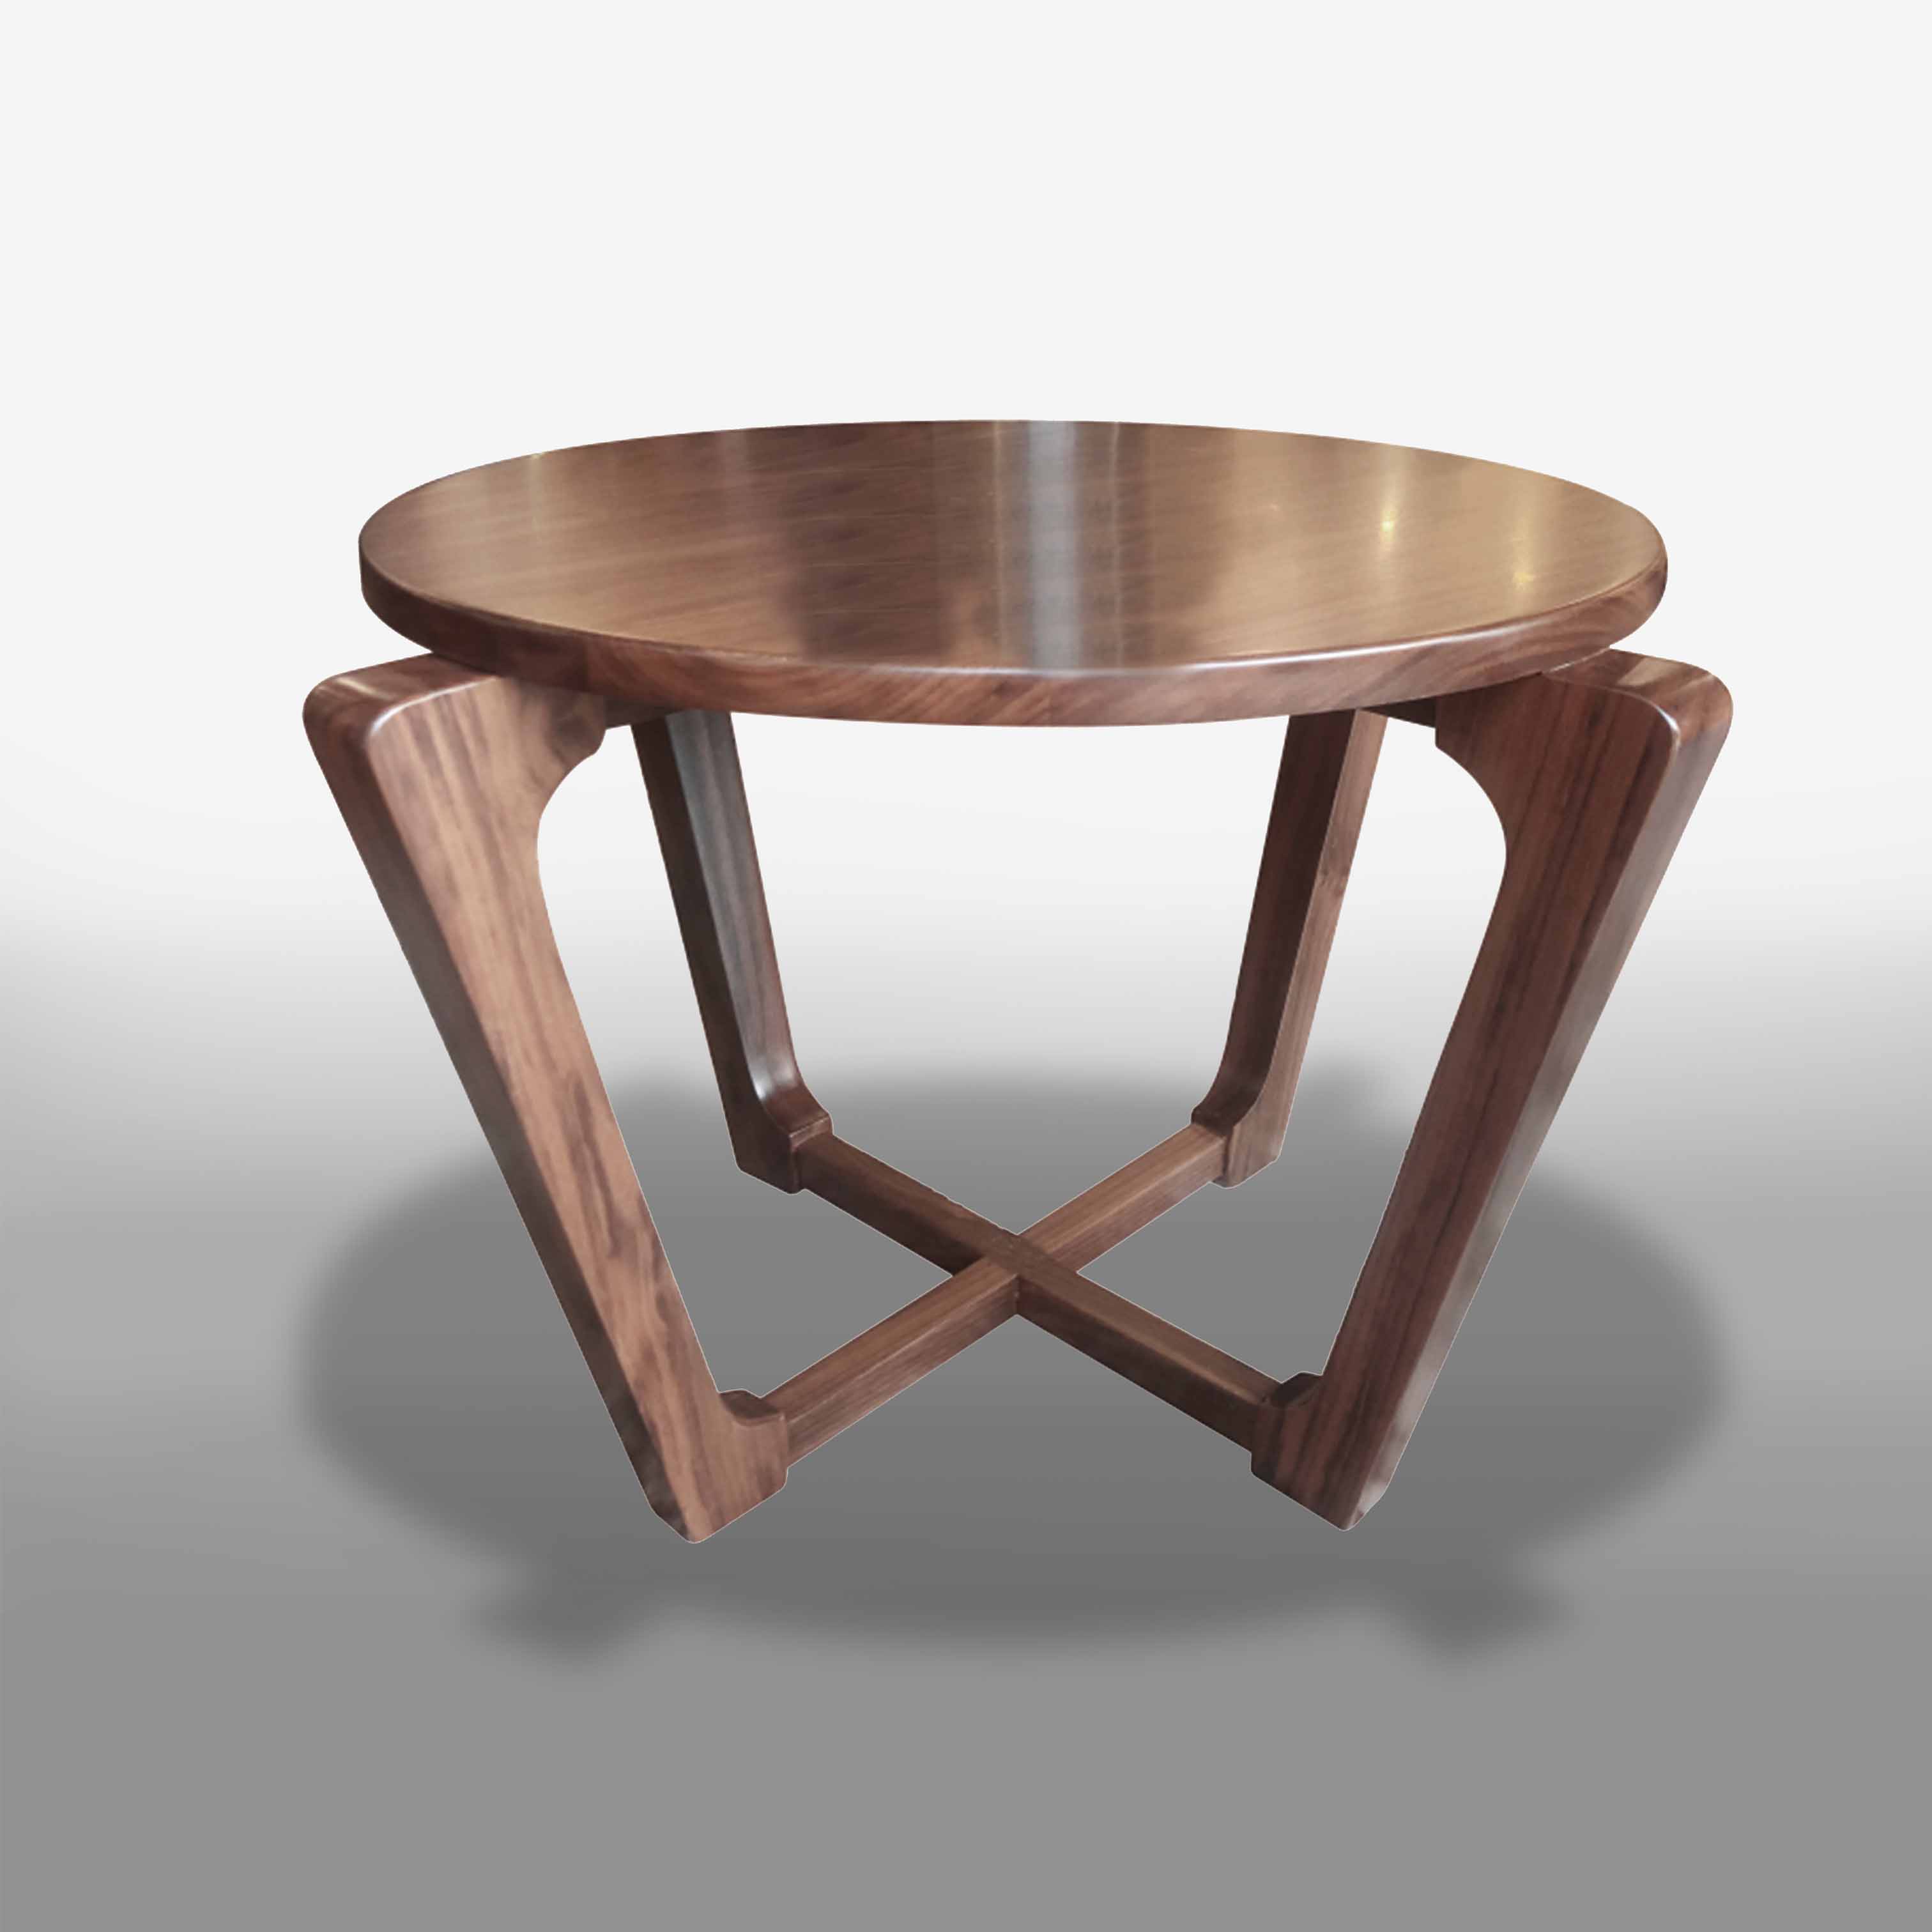 Noble round wooden table - B59LHFU